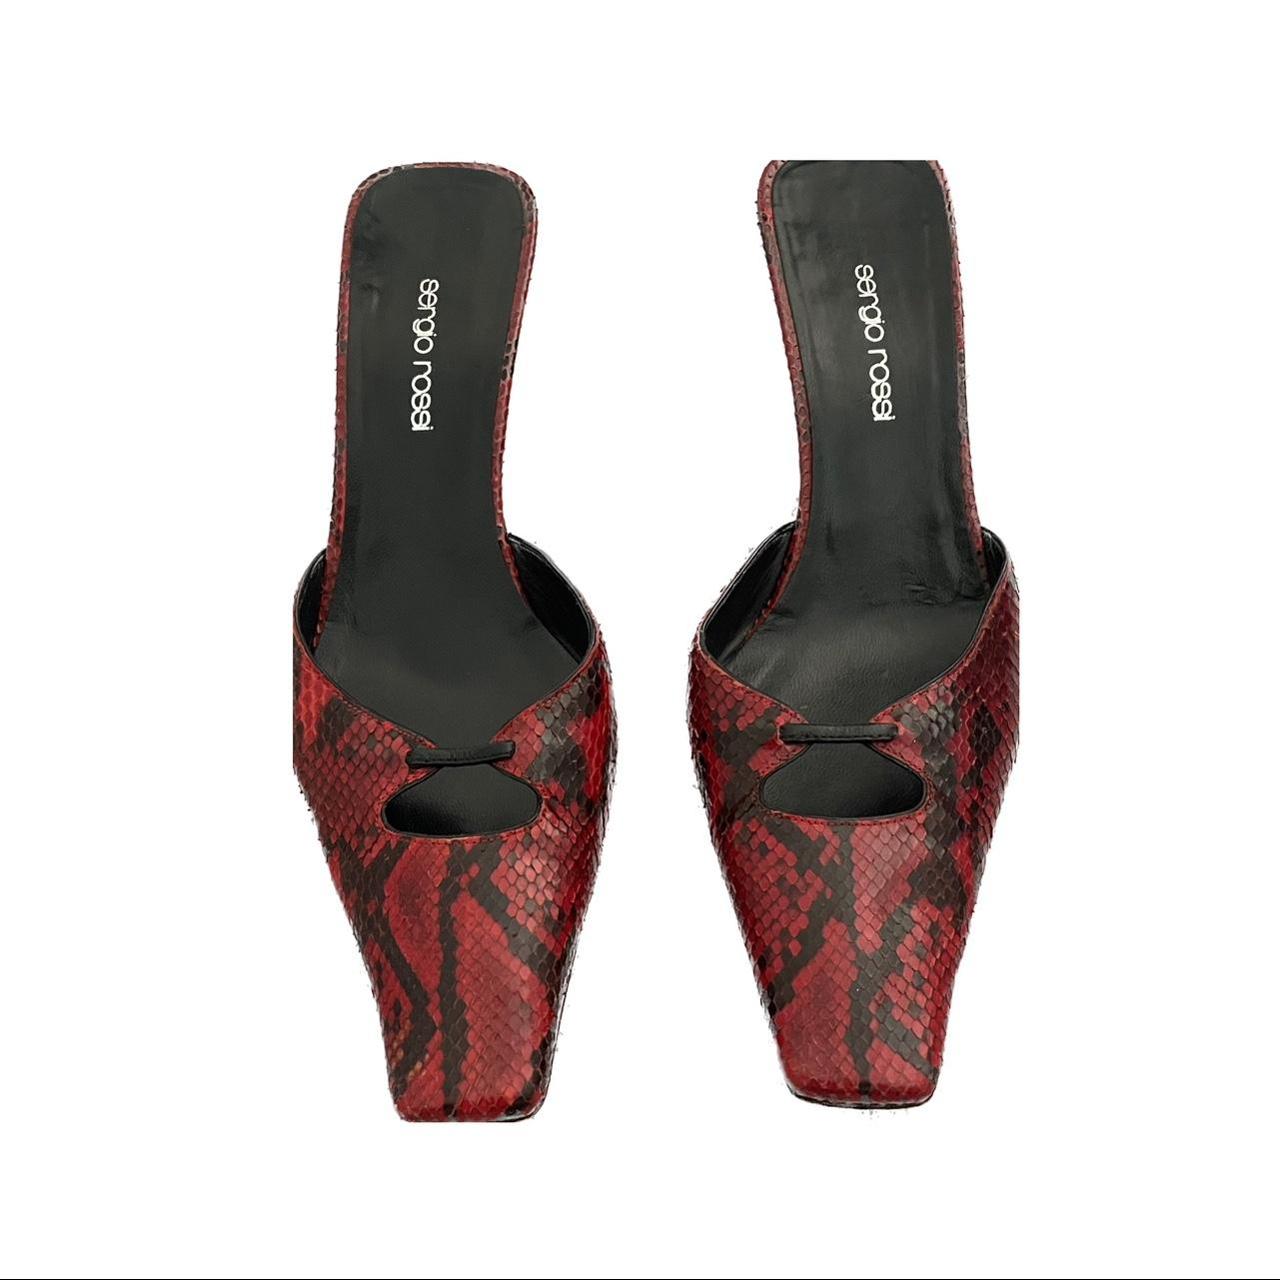 Sergio Rossi Women's Red and Black Courts (2)